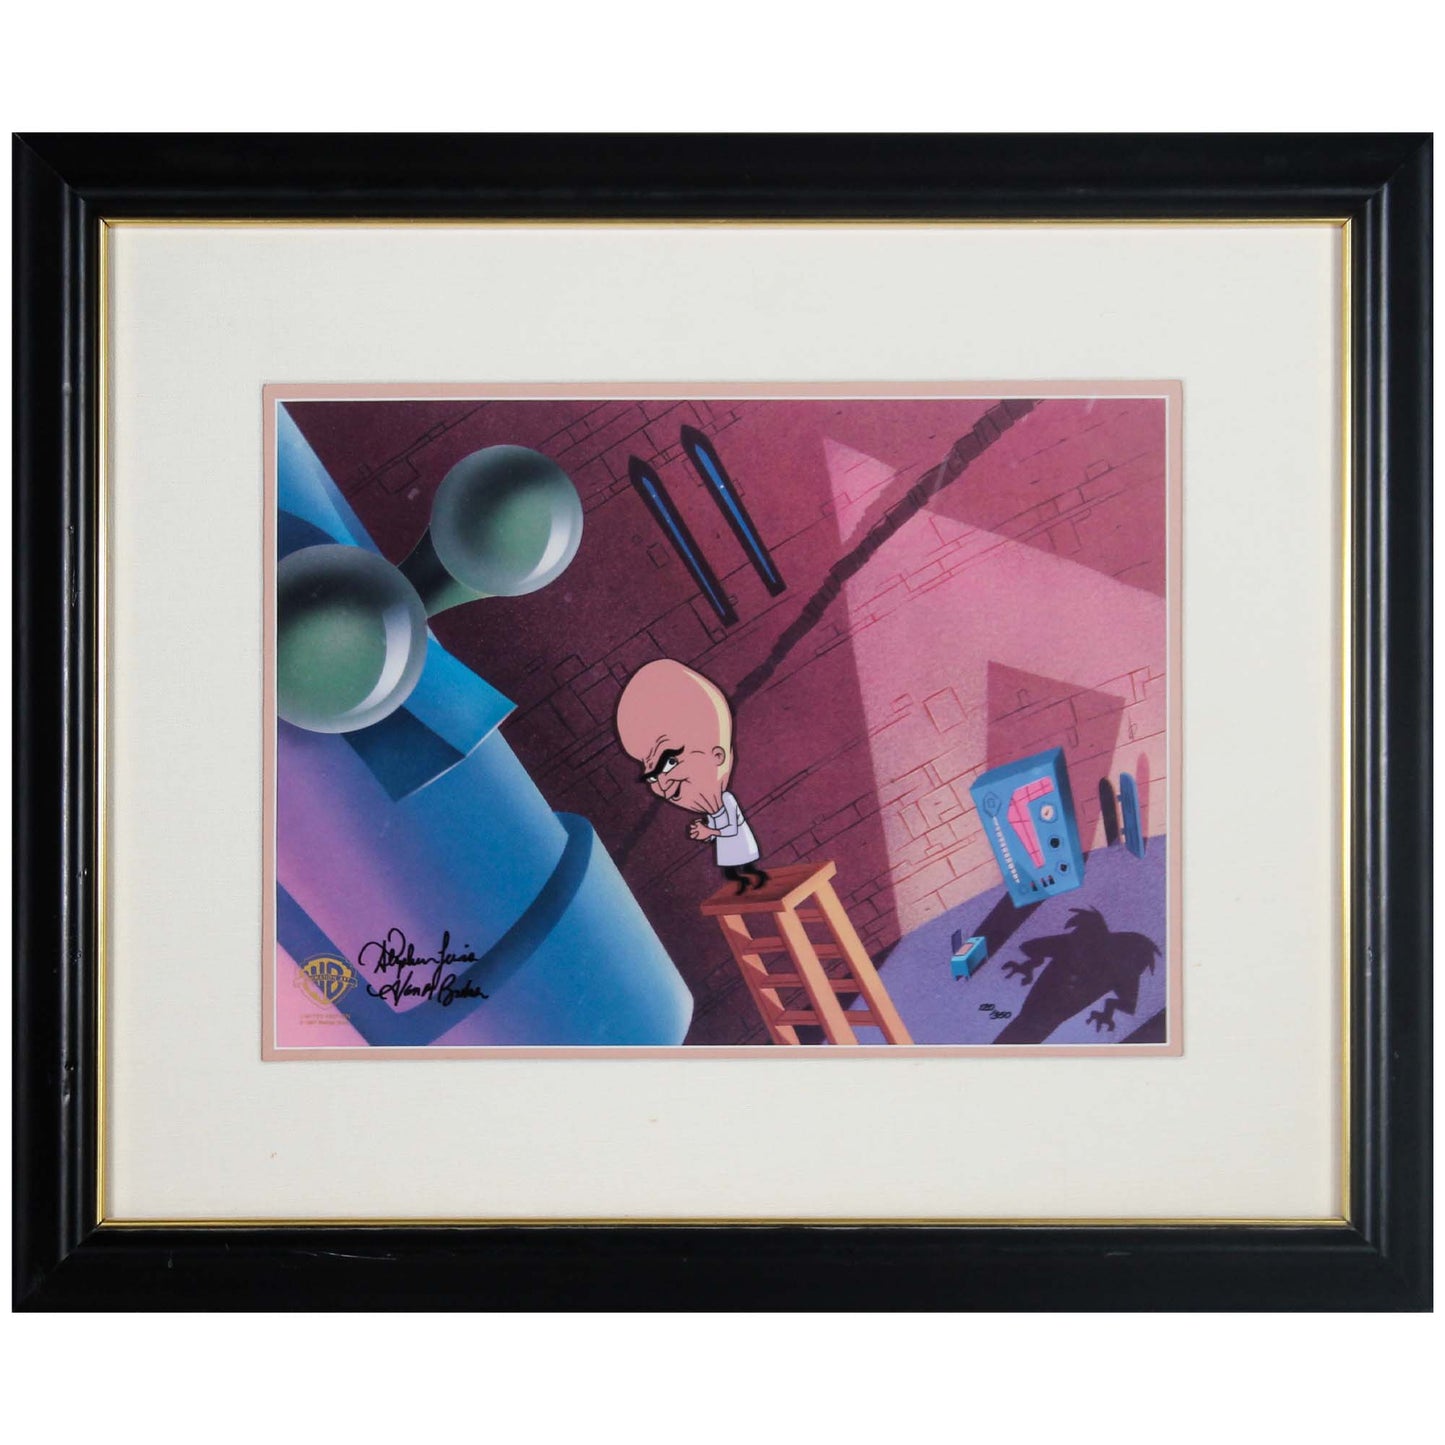 Warner Brothers Animation Cel "The Mad Scientist"